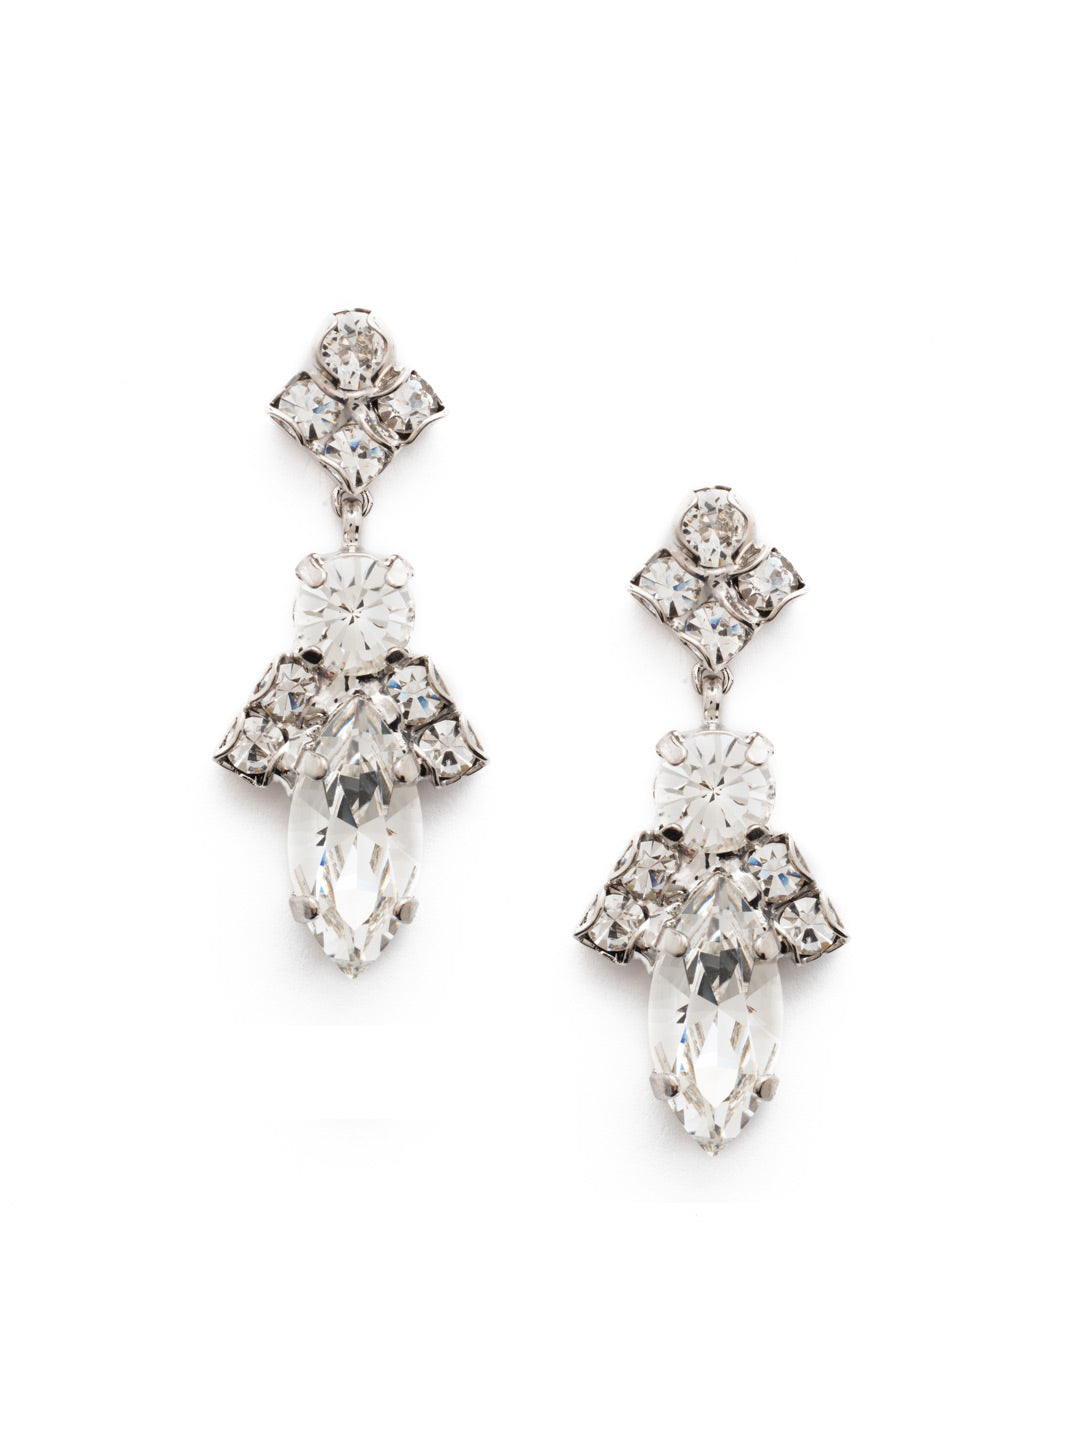 Elegant Navette Dangle Earrings - EDG85RHCRY - <p>A beautiful navette cut crystal is flanked by radiant rounds for a dazzling, deco-reminiscent look. From Sorrelli's Crystal collection in our Palladium Silver-tone finish.</p>